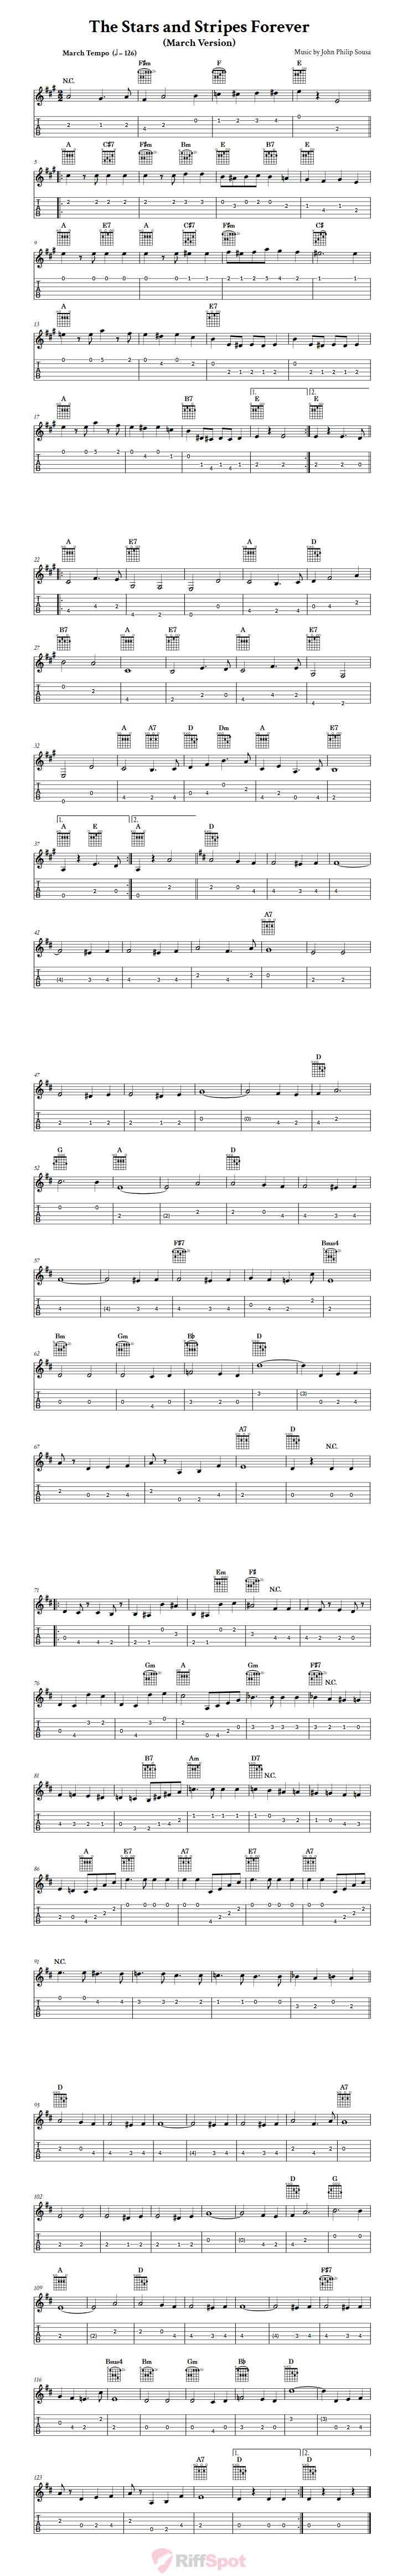 The Stars and Stripes Forever (March) Guitar Tab